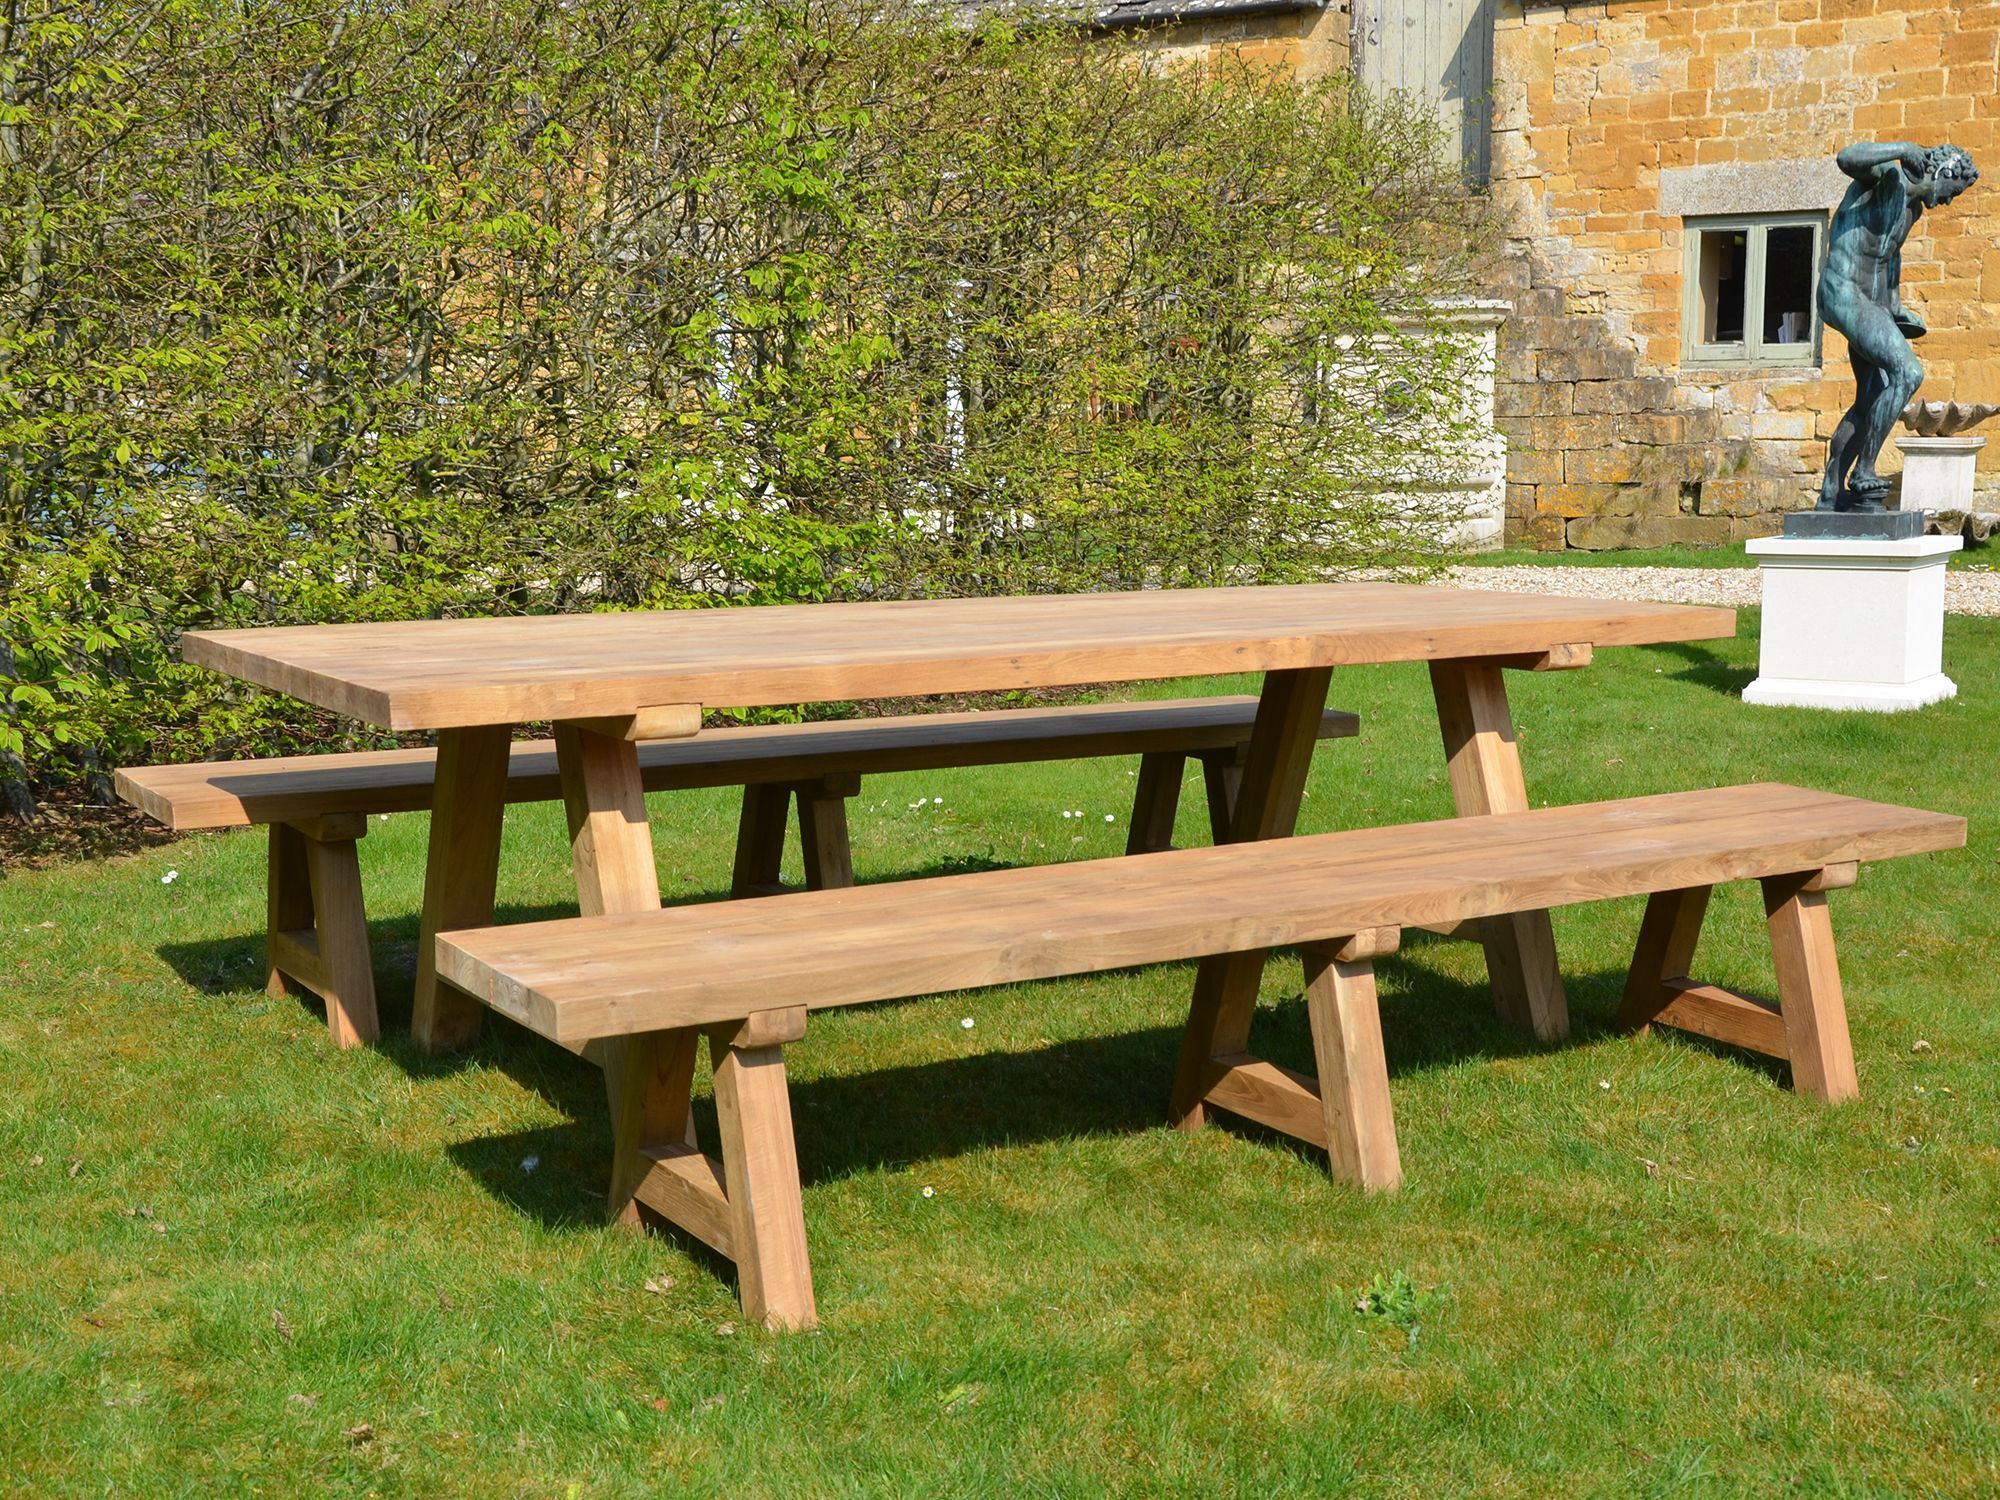 The Wooden Garden Table and Benches Set 